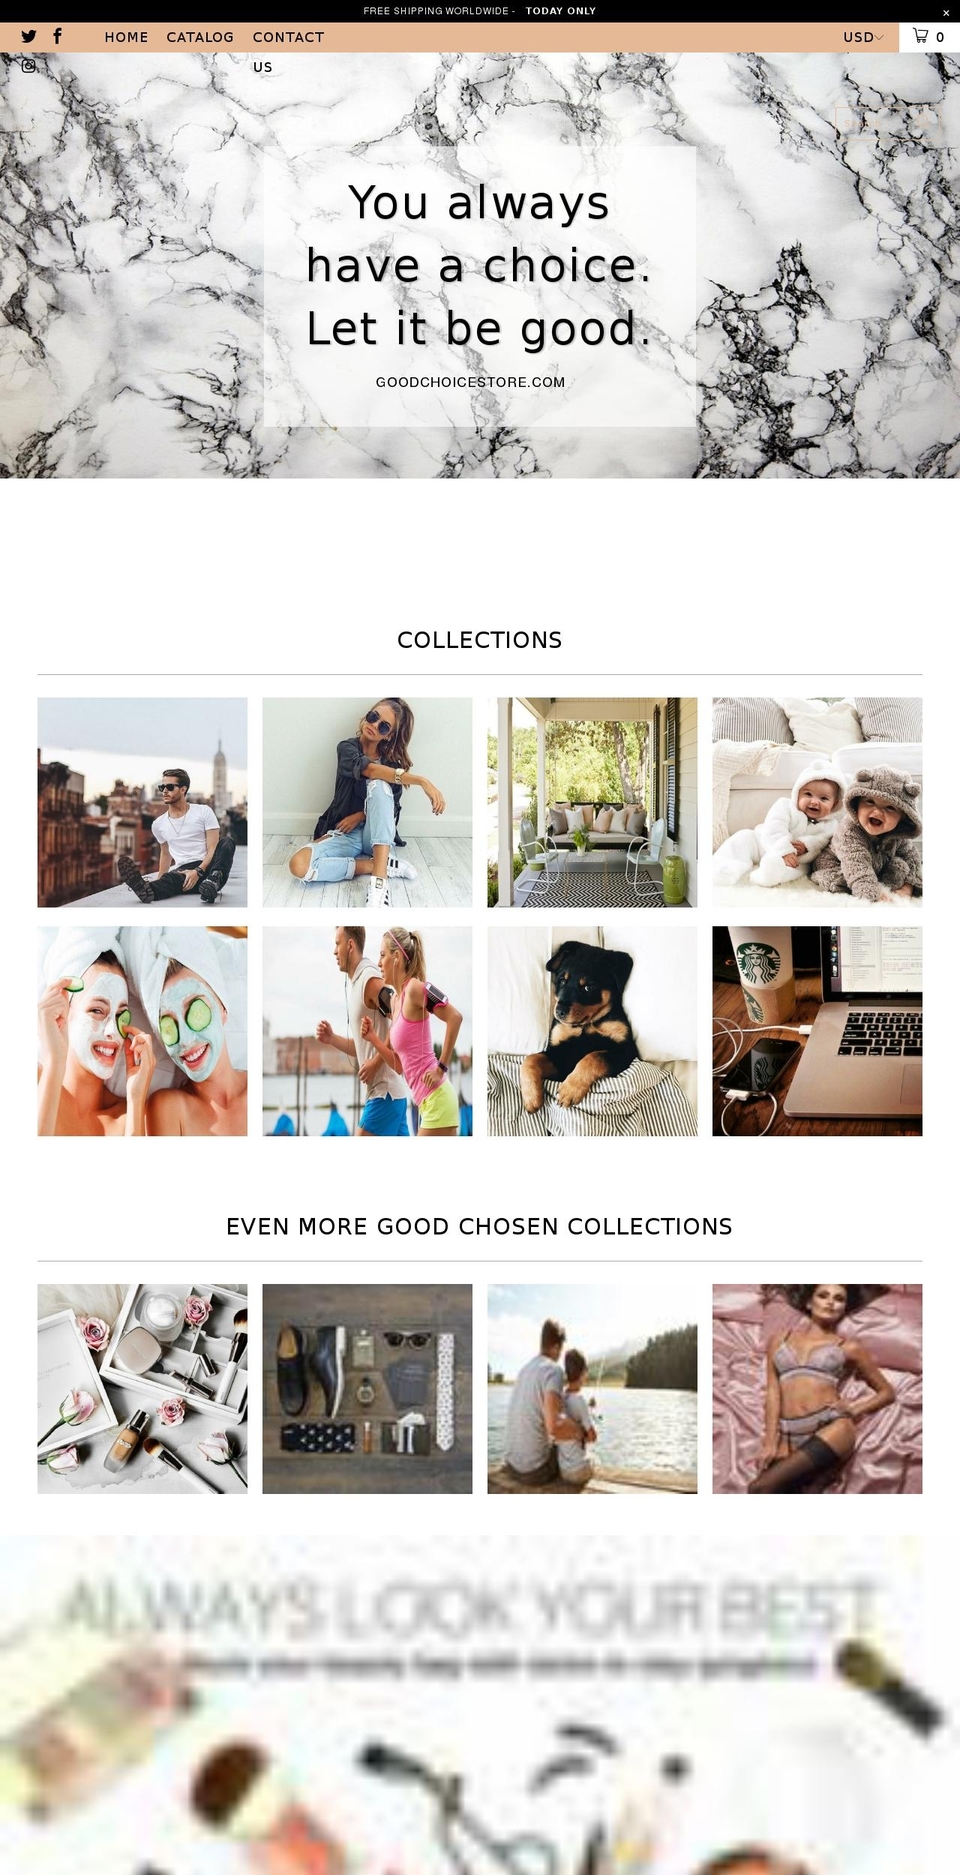 turbo-May-4-2018 Shopify theme site example goodchoicestore.com